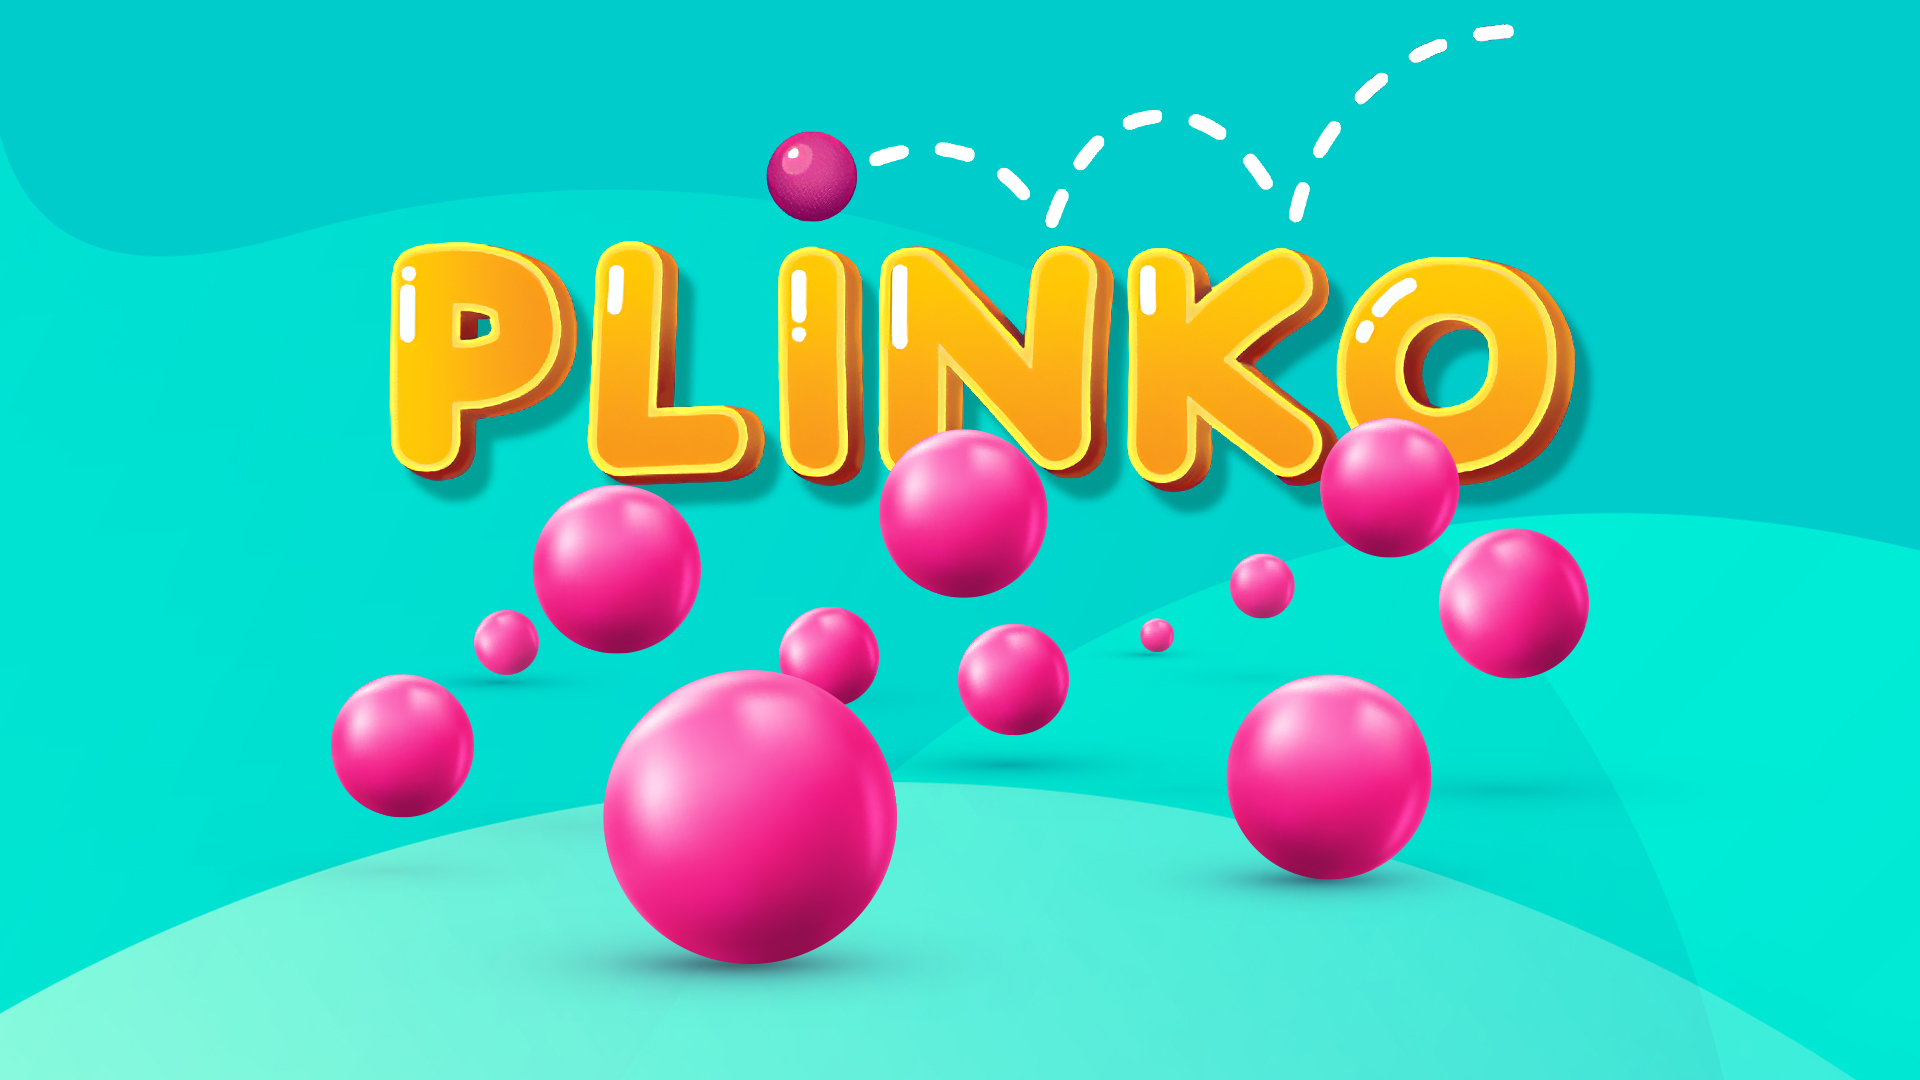 Round, pink balls bounce around the word ‘Plinko’ from the SlotsLV specialty game, set against a teal blue background.